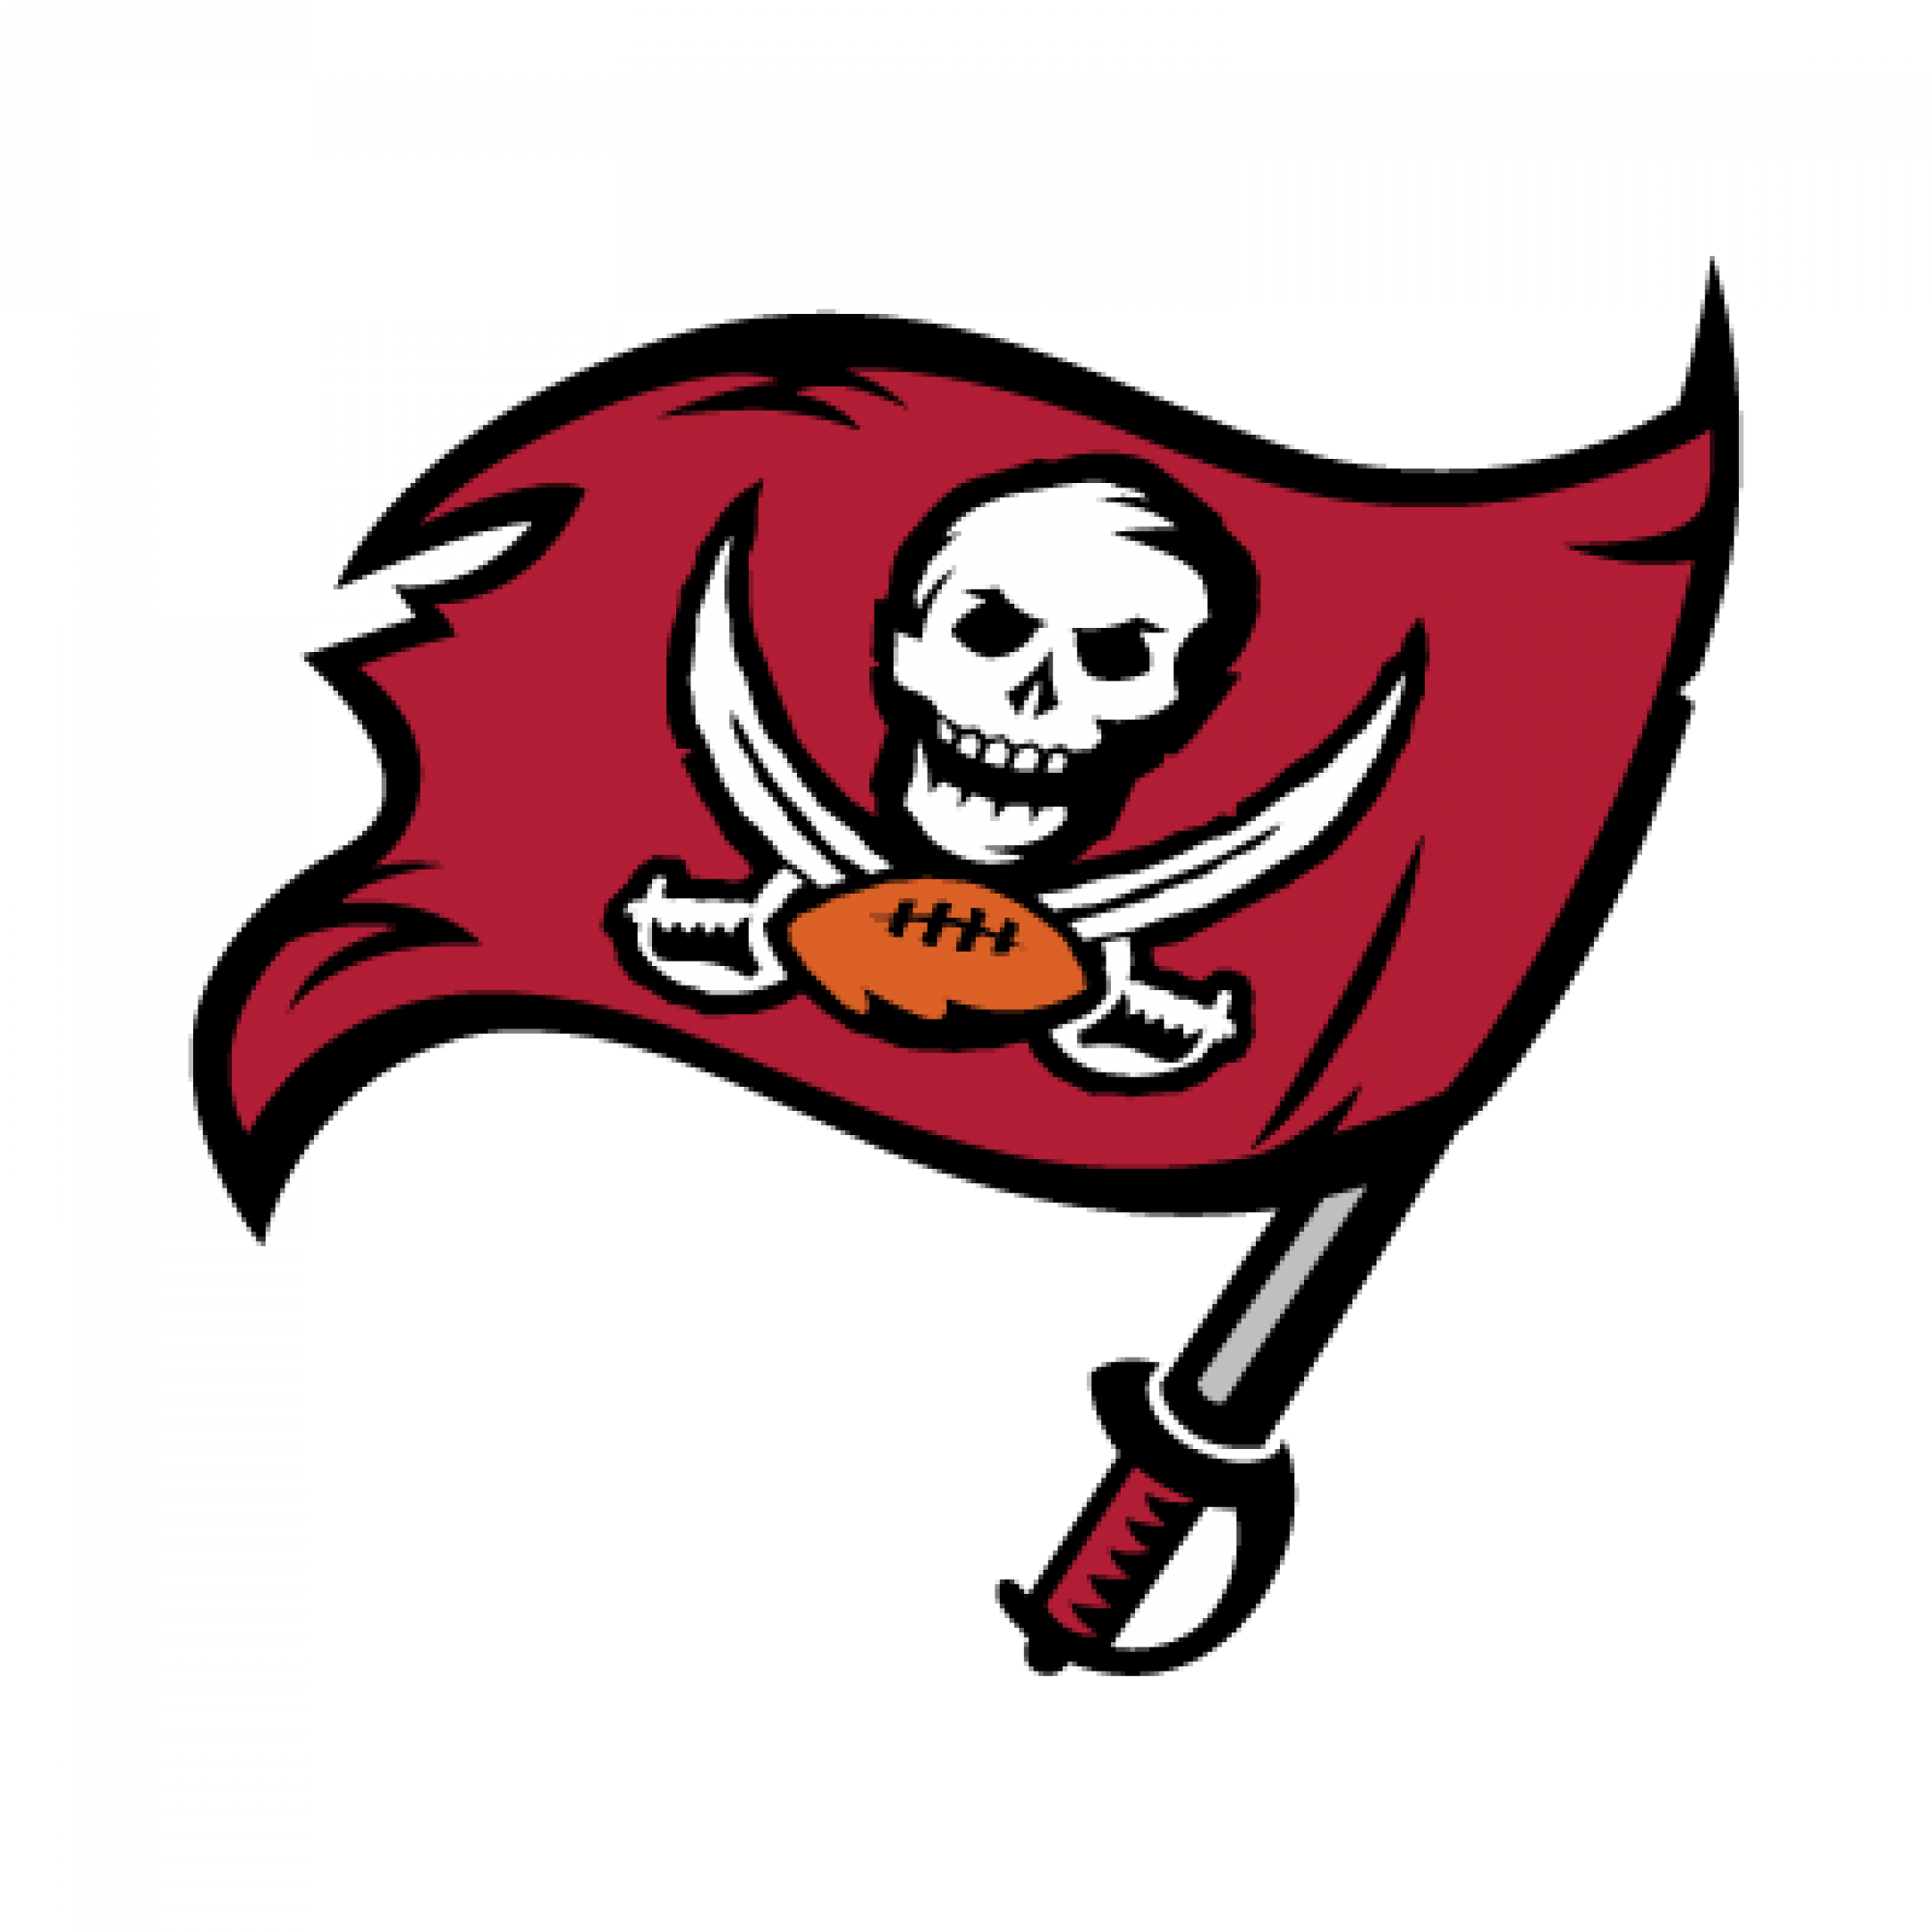 A Flag With A Skull And A Football